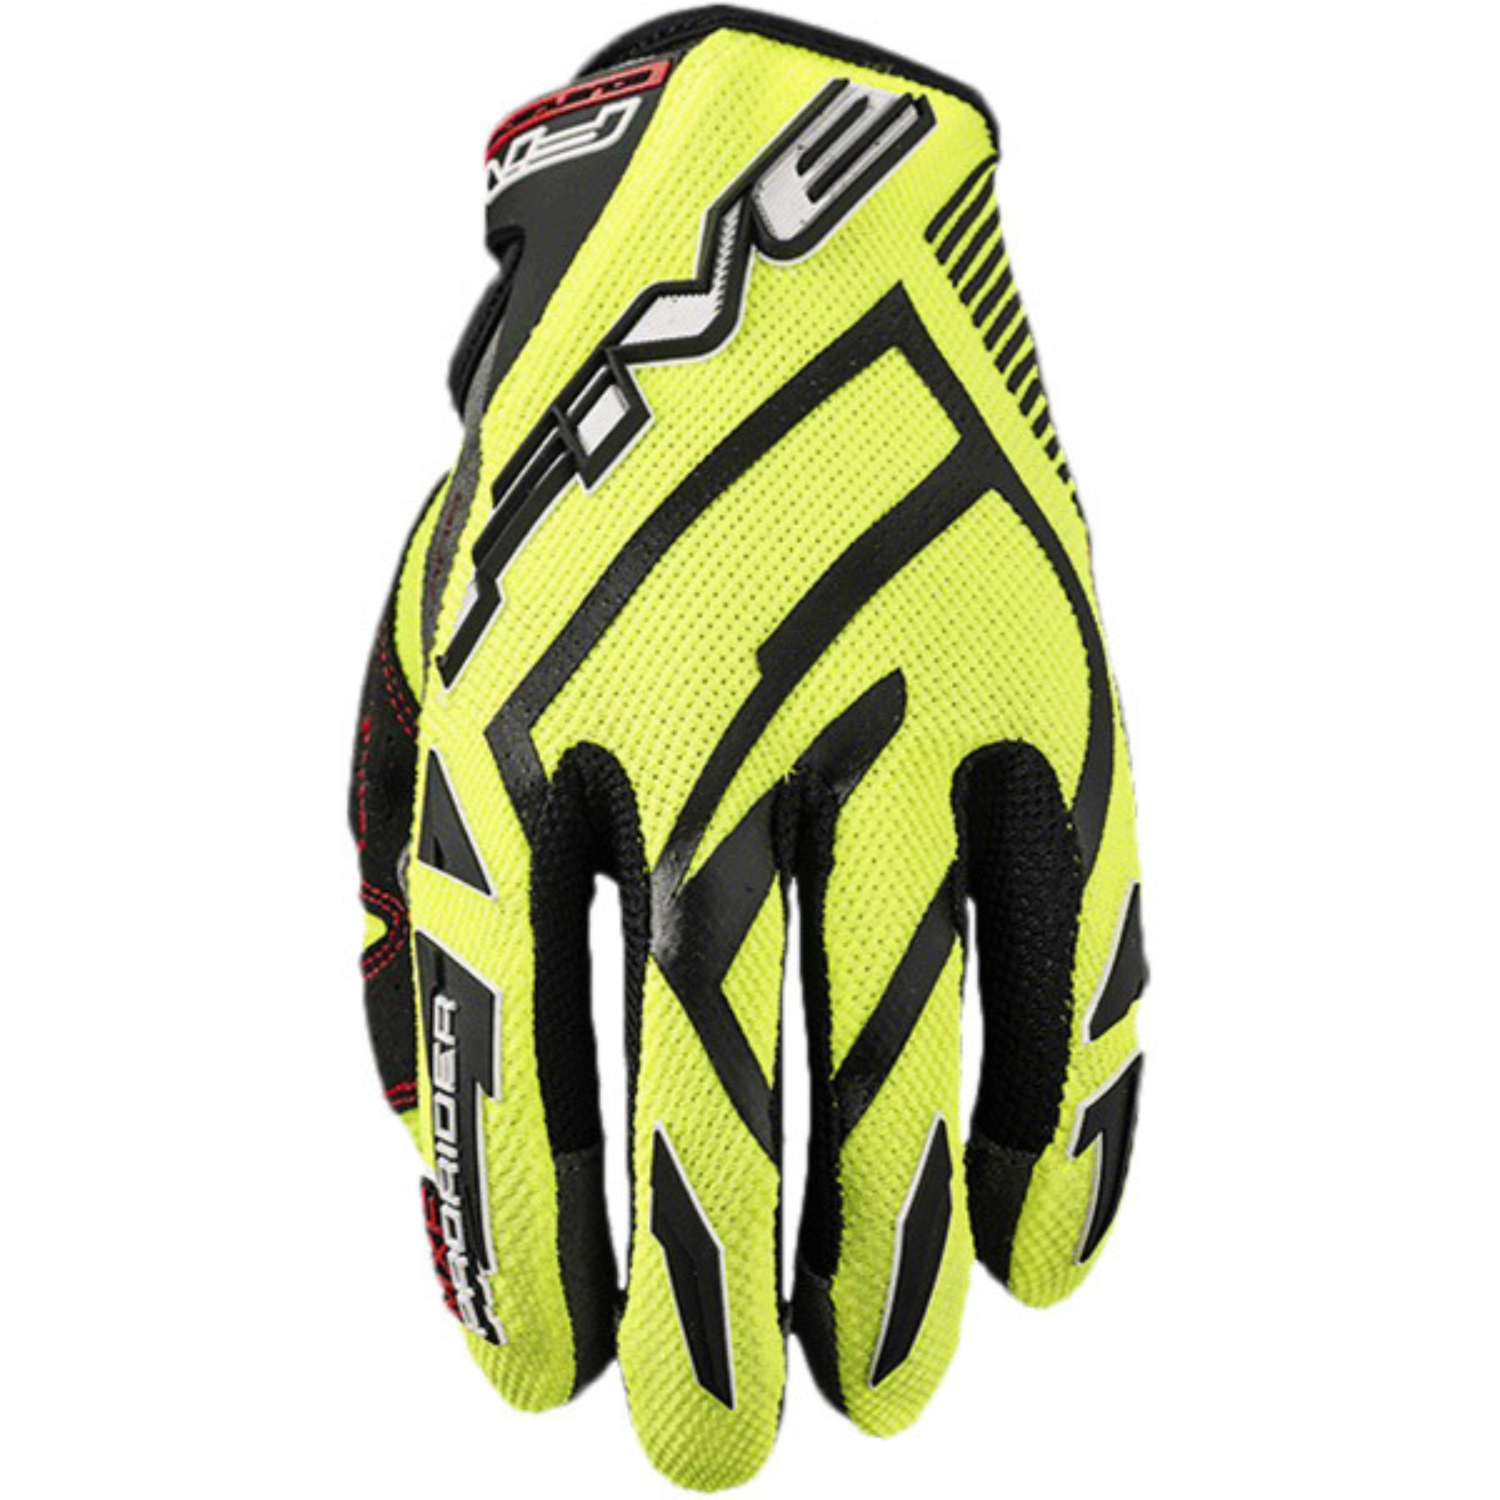 Image of EU Five MXF Prorider S Gloves Black Yellow Taille 3XL